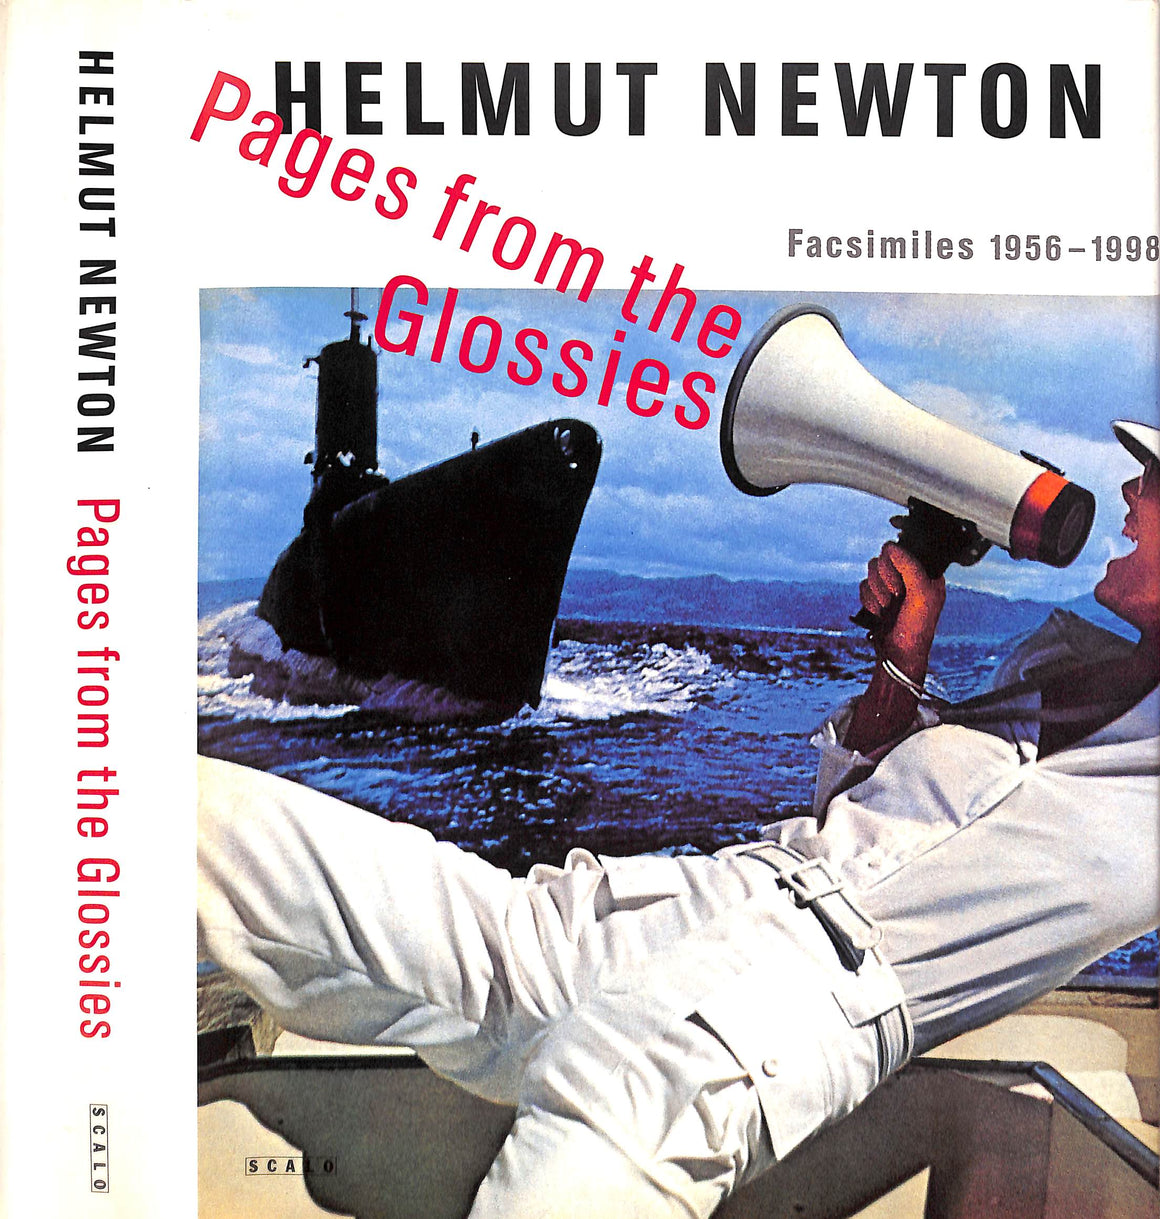 "Helmut Newton Pages From The Glossies Facsimiles 1956-1998" NEWTON, June and KELLER, Walter [edited by]